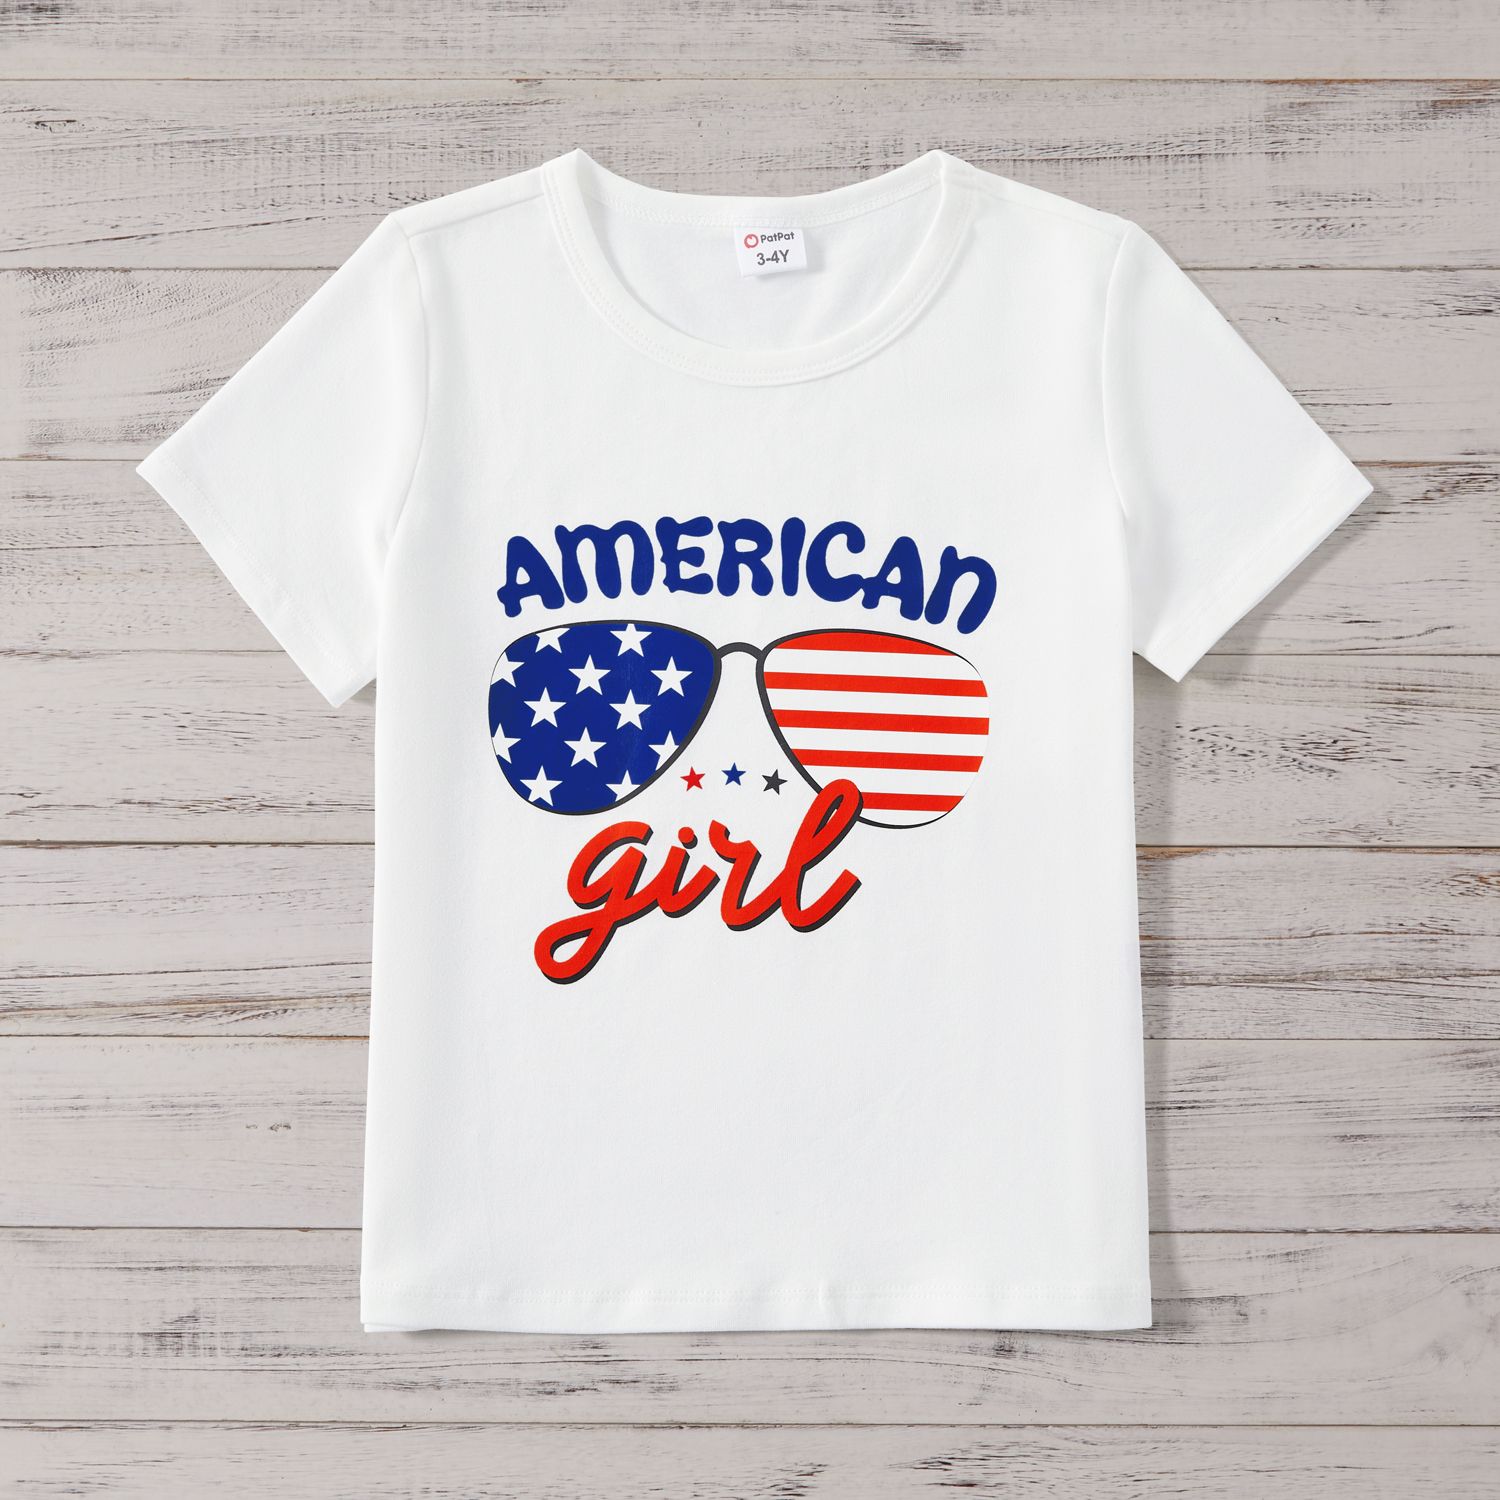 Independence Day Family Matching Cotton Short-sleeve Tee